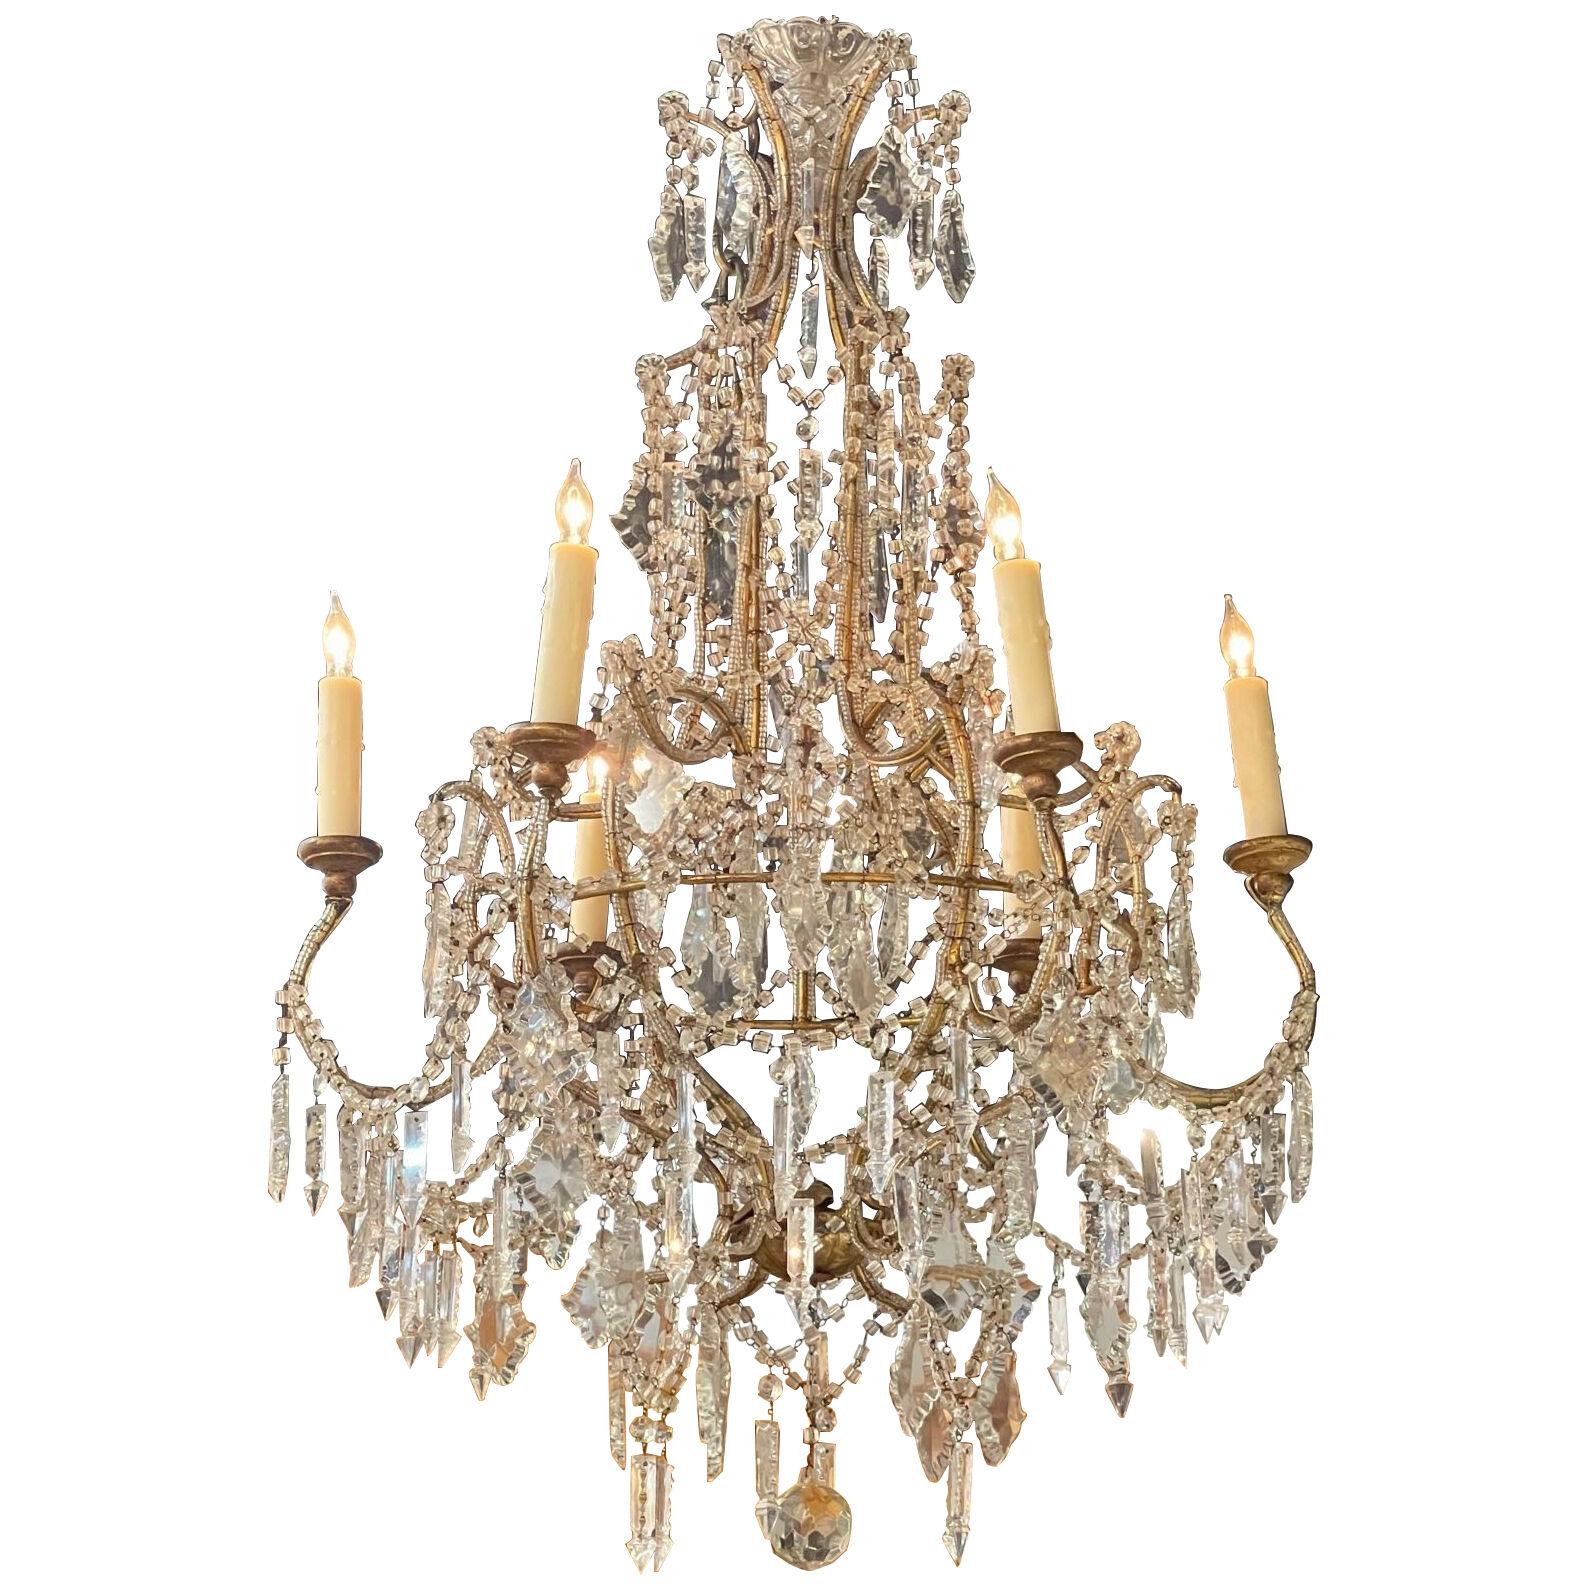 Vintage Italian Beaded Crystal Chandelier with 6 Lights